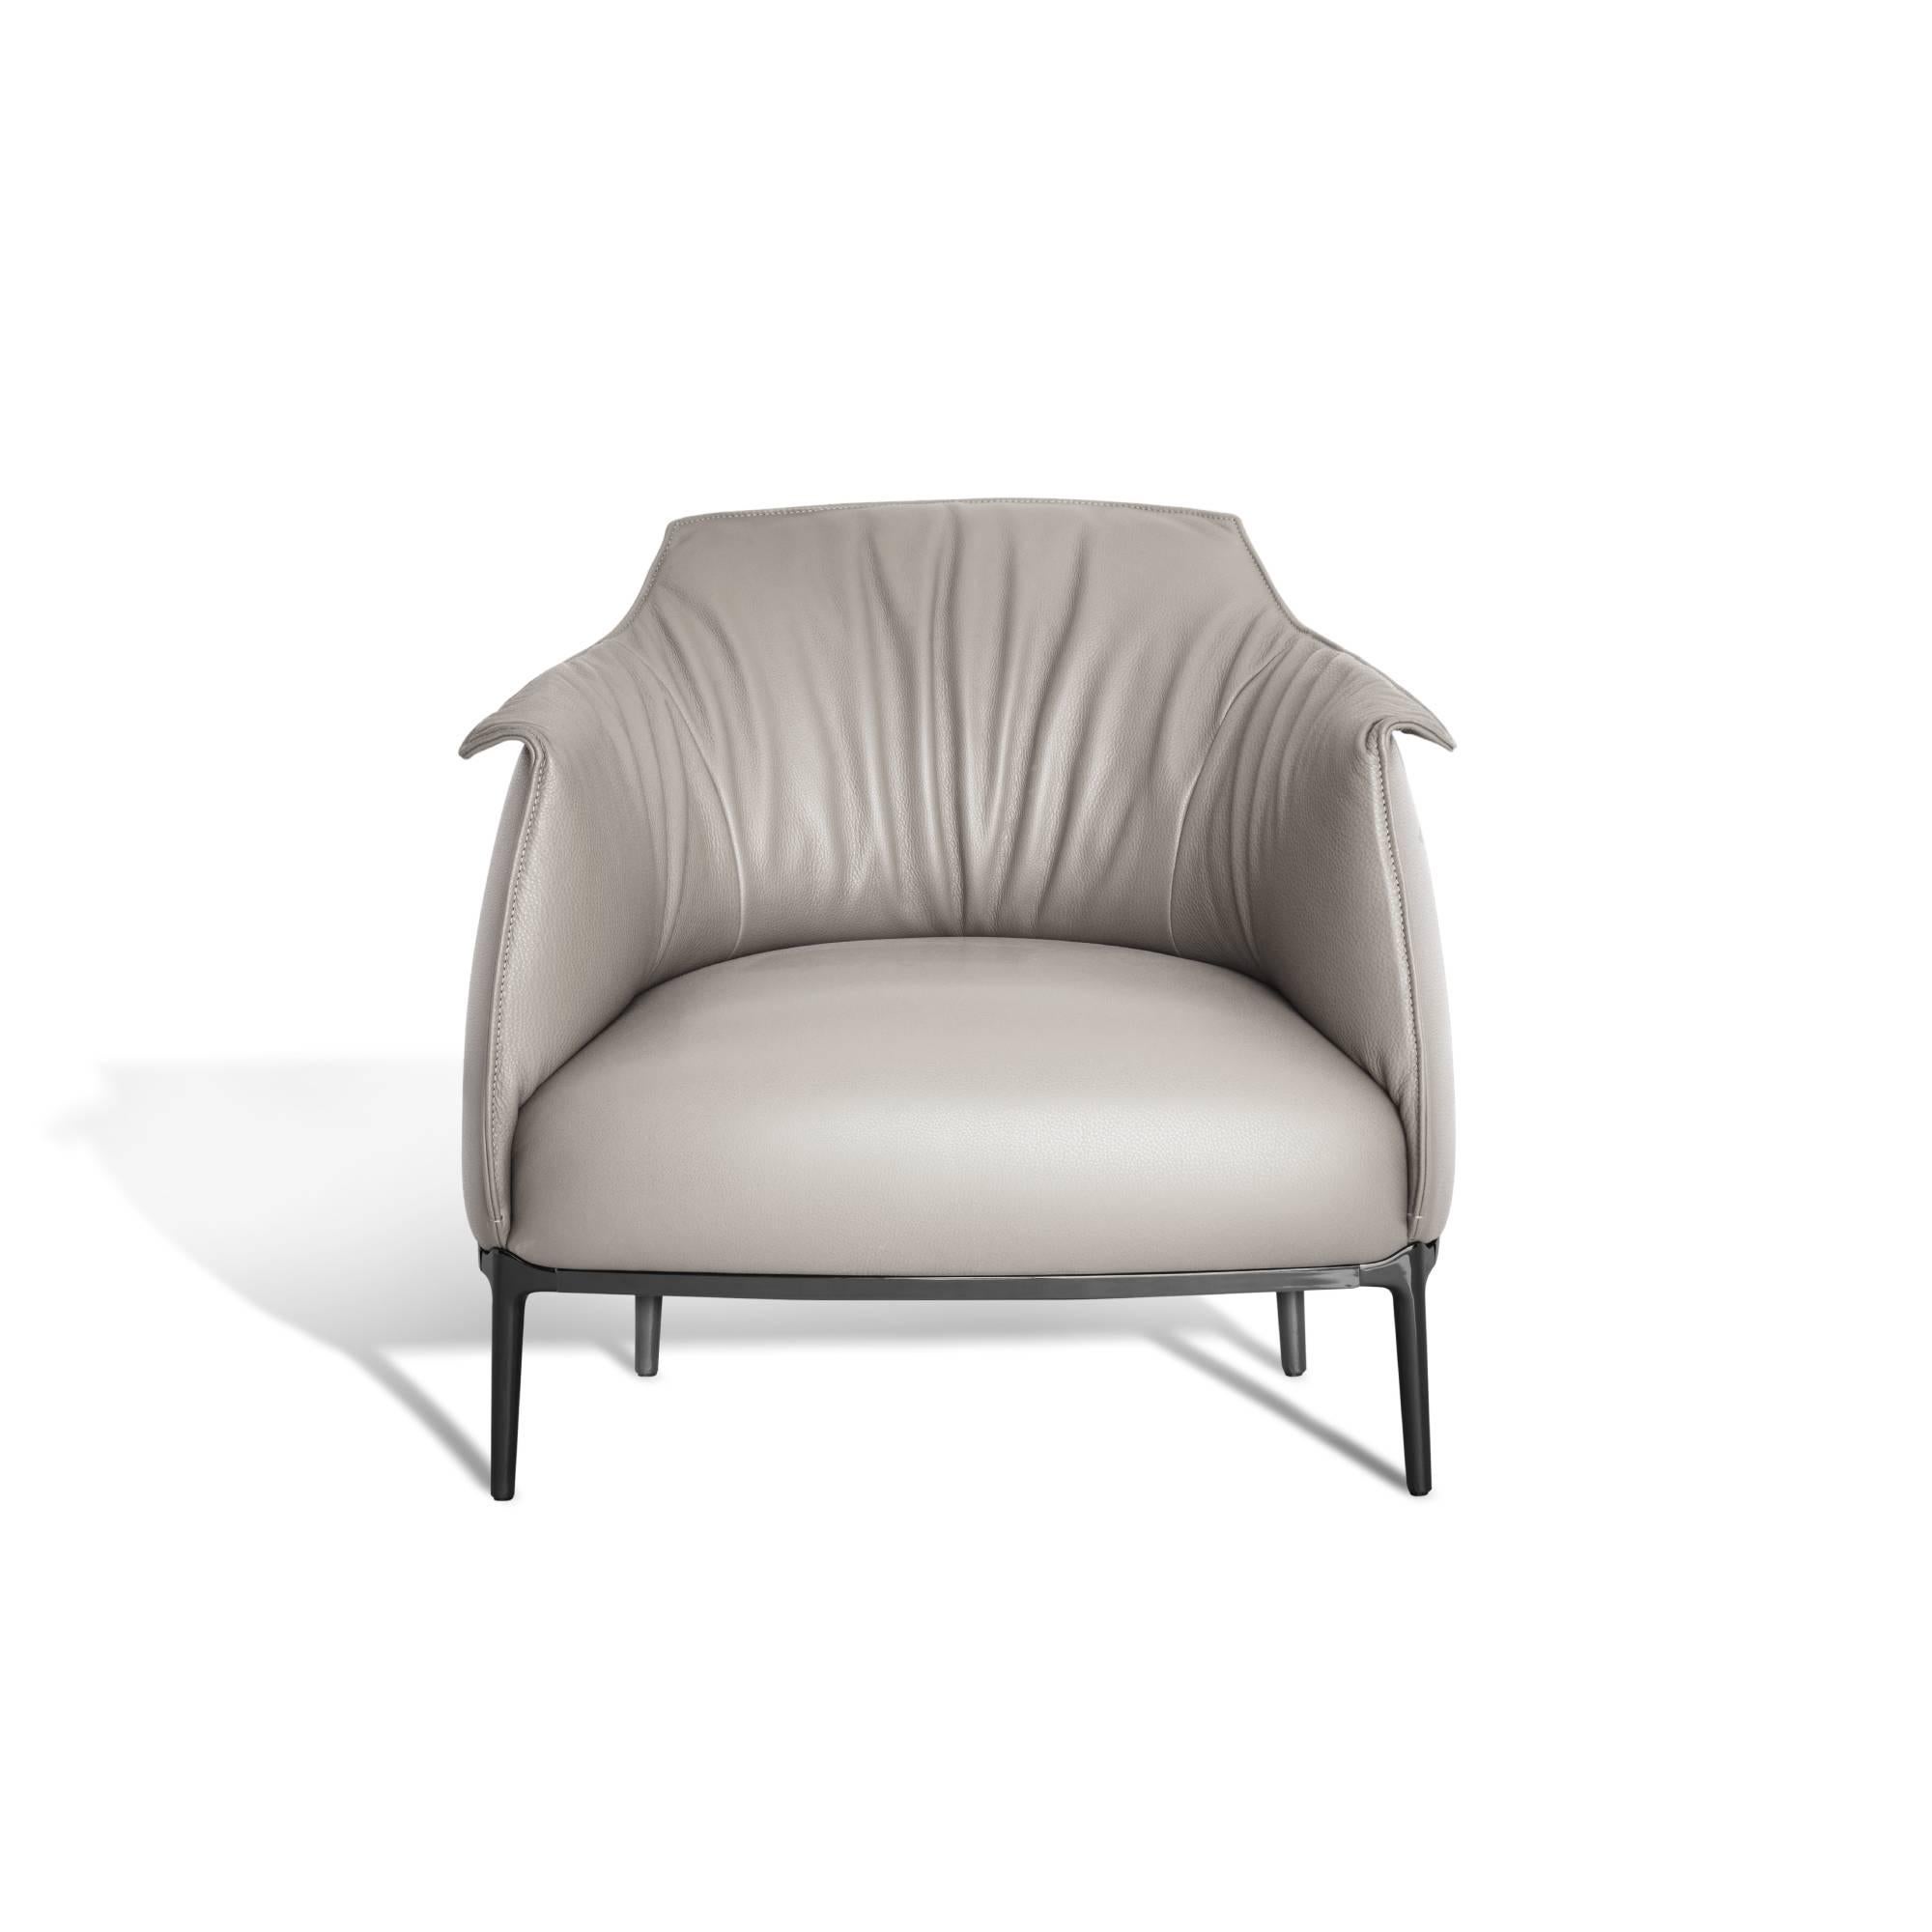 The Archibald by Jean-Marie Massaud is the perfect combination of substance and form, the armchairs and poufs boasting a comfortable and enveloping design ideal for meditation and relaxation. The breadth and depth of the seat are balanced by its